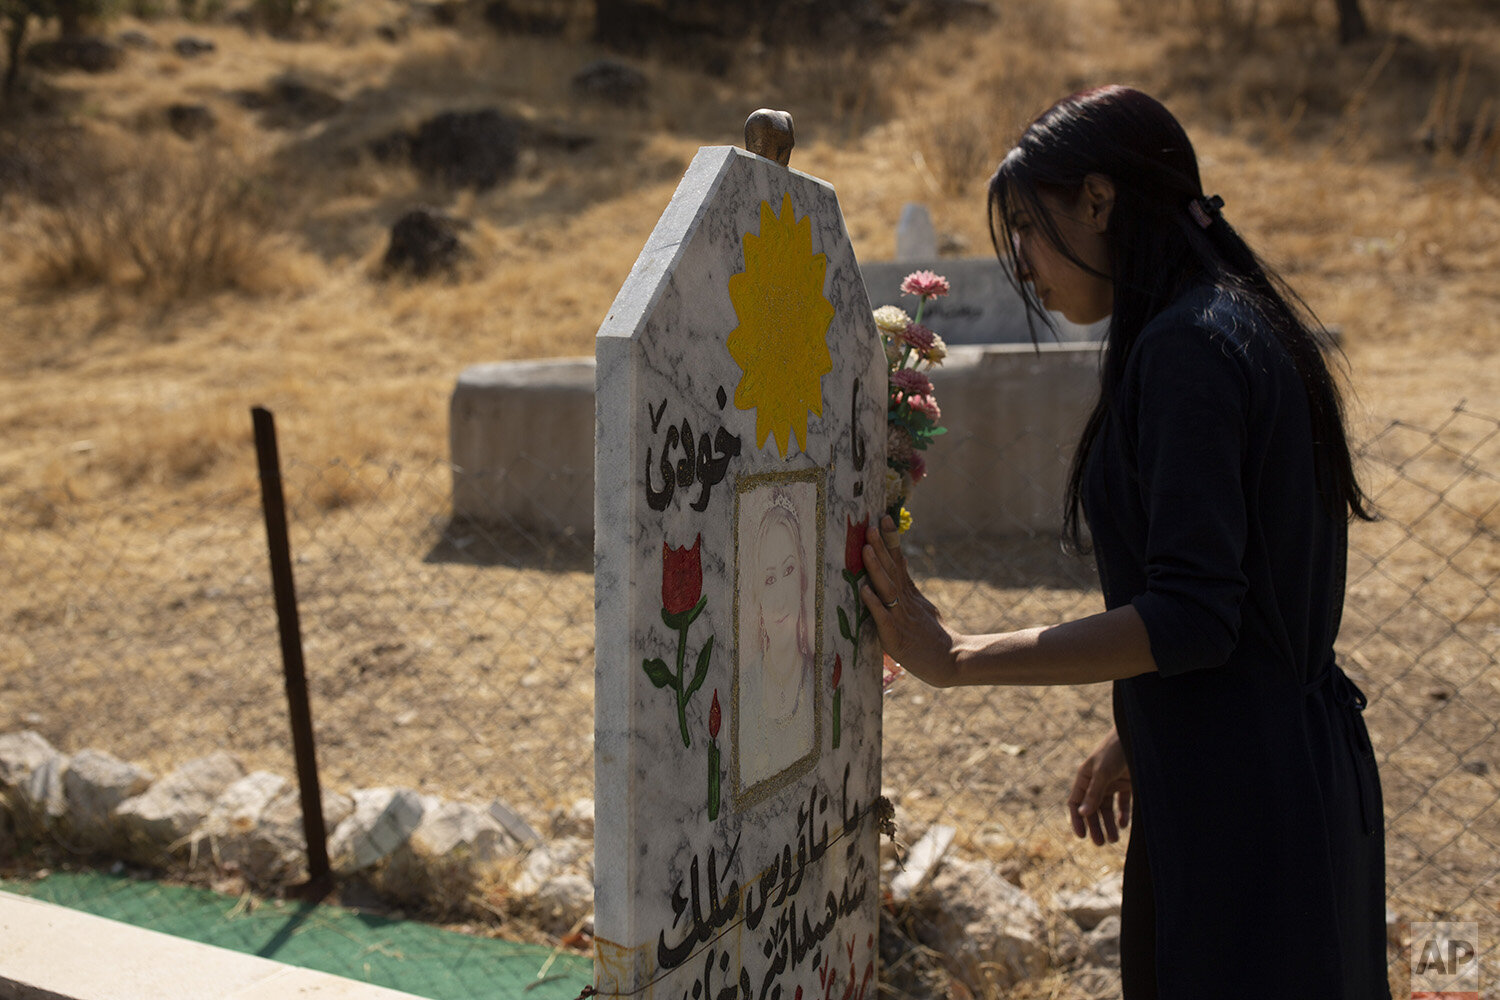  In this Sept. 13, 2019, photo, Layla Taloo visits the grave of a Yazidi woman who took her own life after she was captured by Islamic State militants in Mosul, buried on a hill overlooking the Lalish shrine in northern Iraq.              Some 3,500 